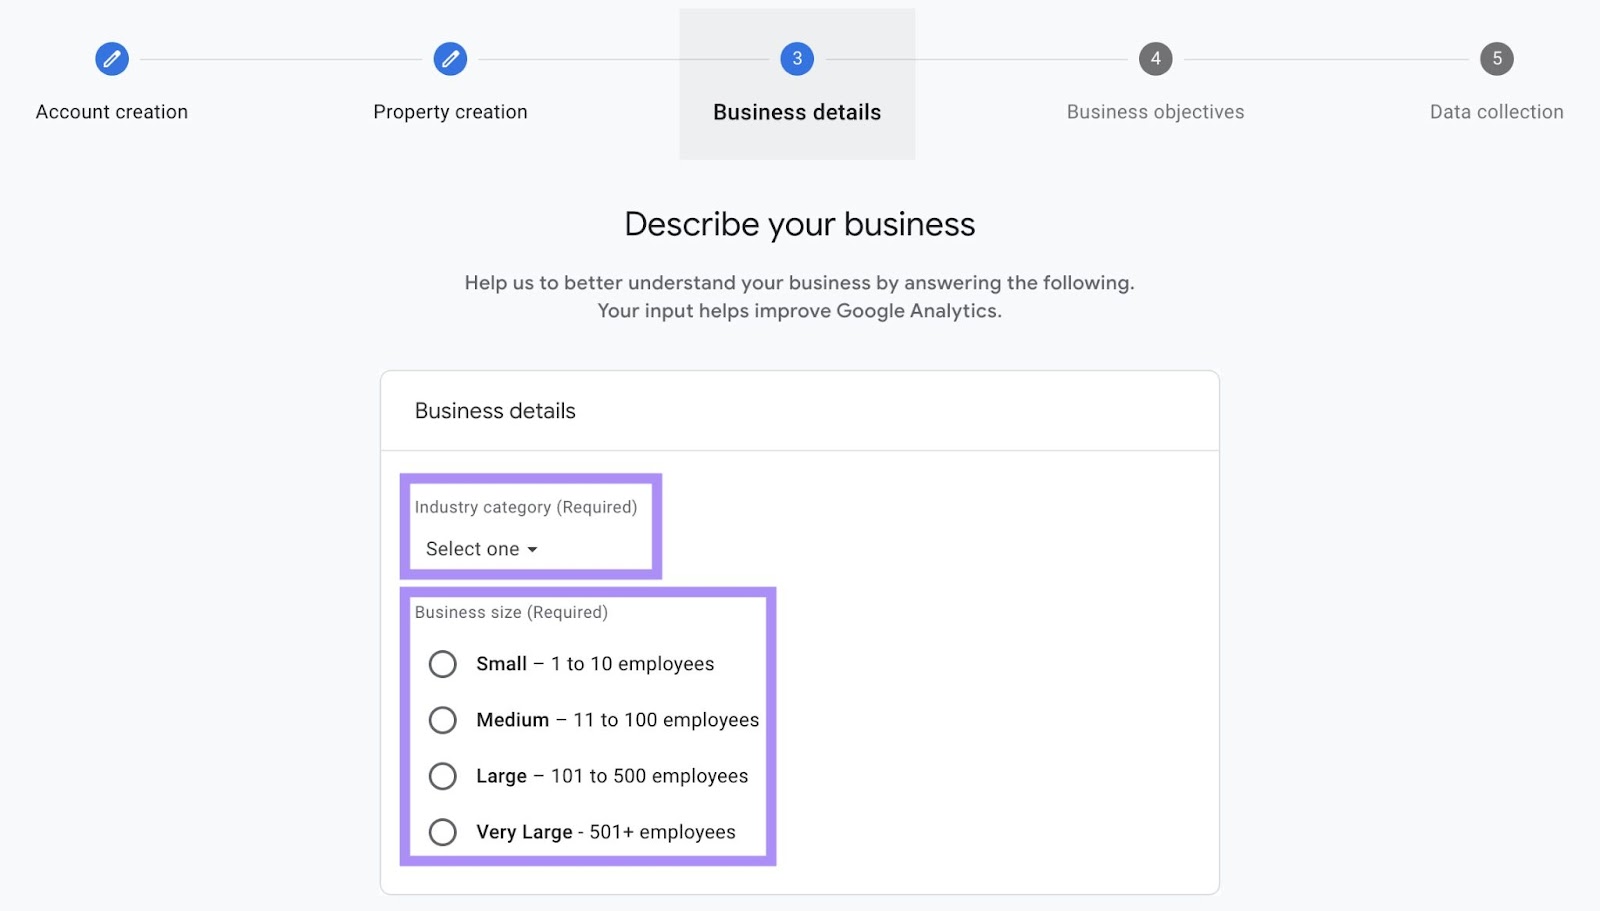 “Industry category” and “Business size” fields nether  "Describe your business" step